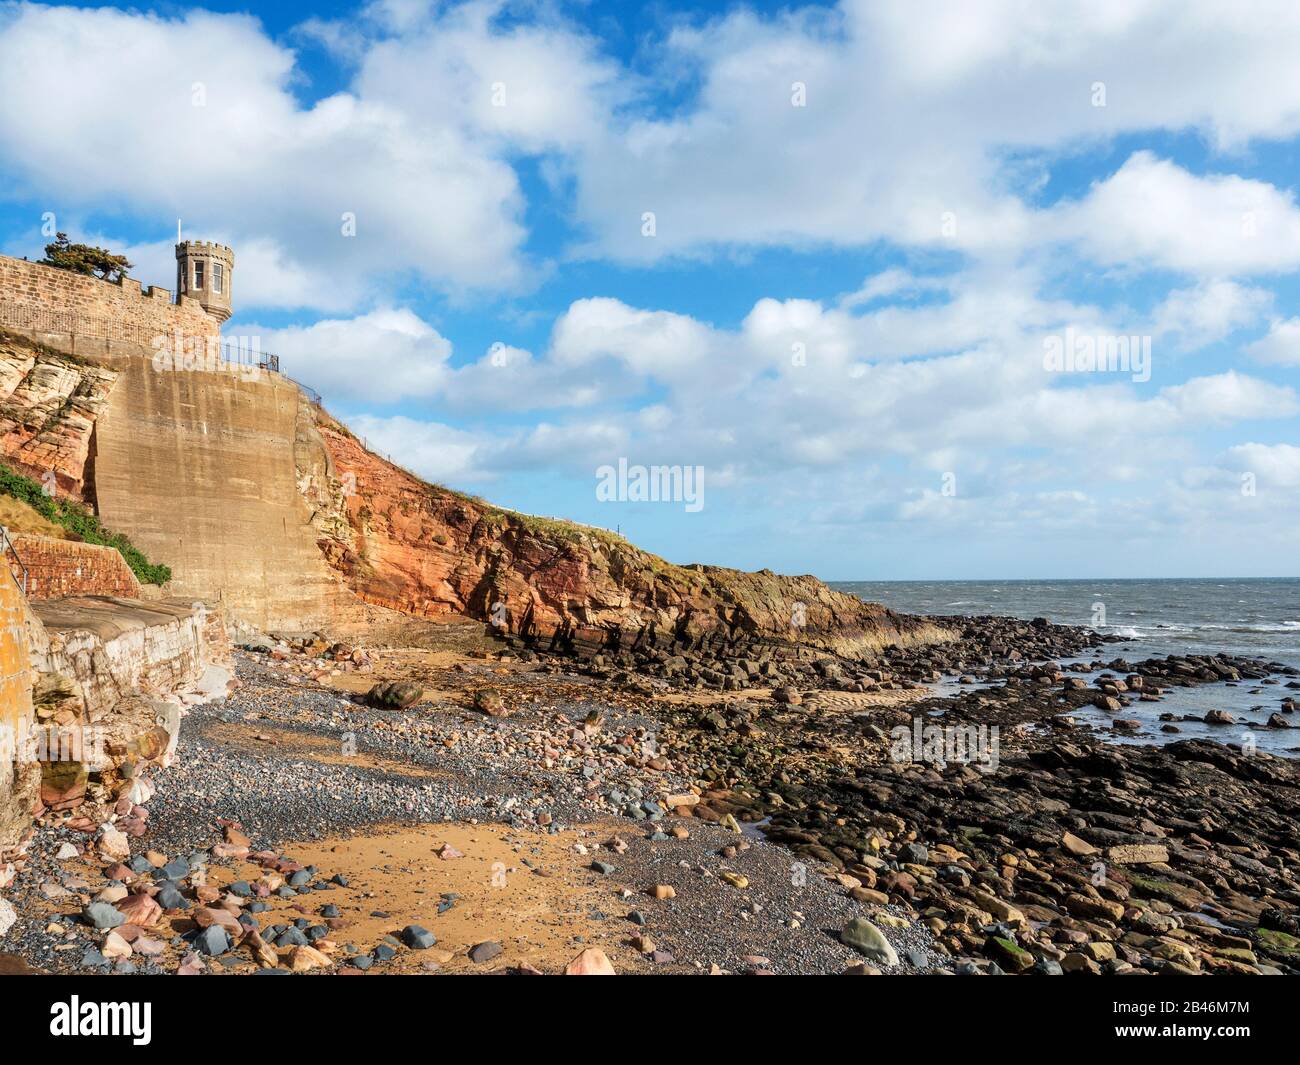 Castle Walk overlooking the rocky beach at Crail East Neuk of Fife Scotland Stock Photo